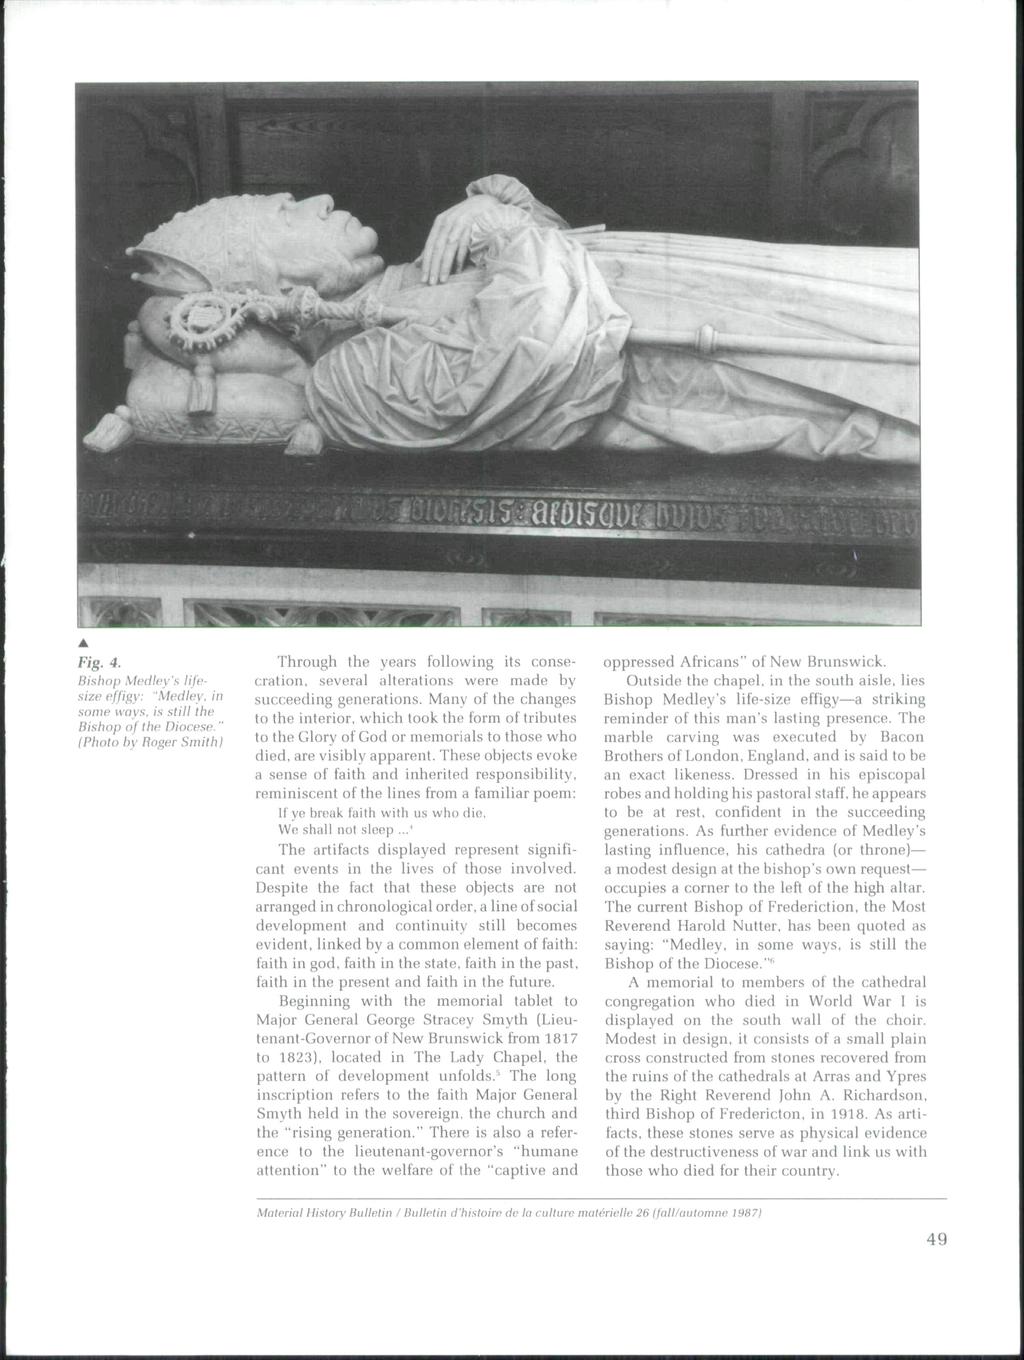 Fig- 4. Bishop Medley's lifesize effigy: 'Medley, in some ways, is still the Bishop oj the Diocese.